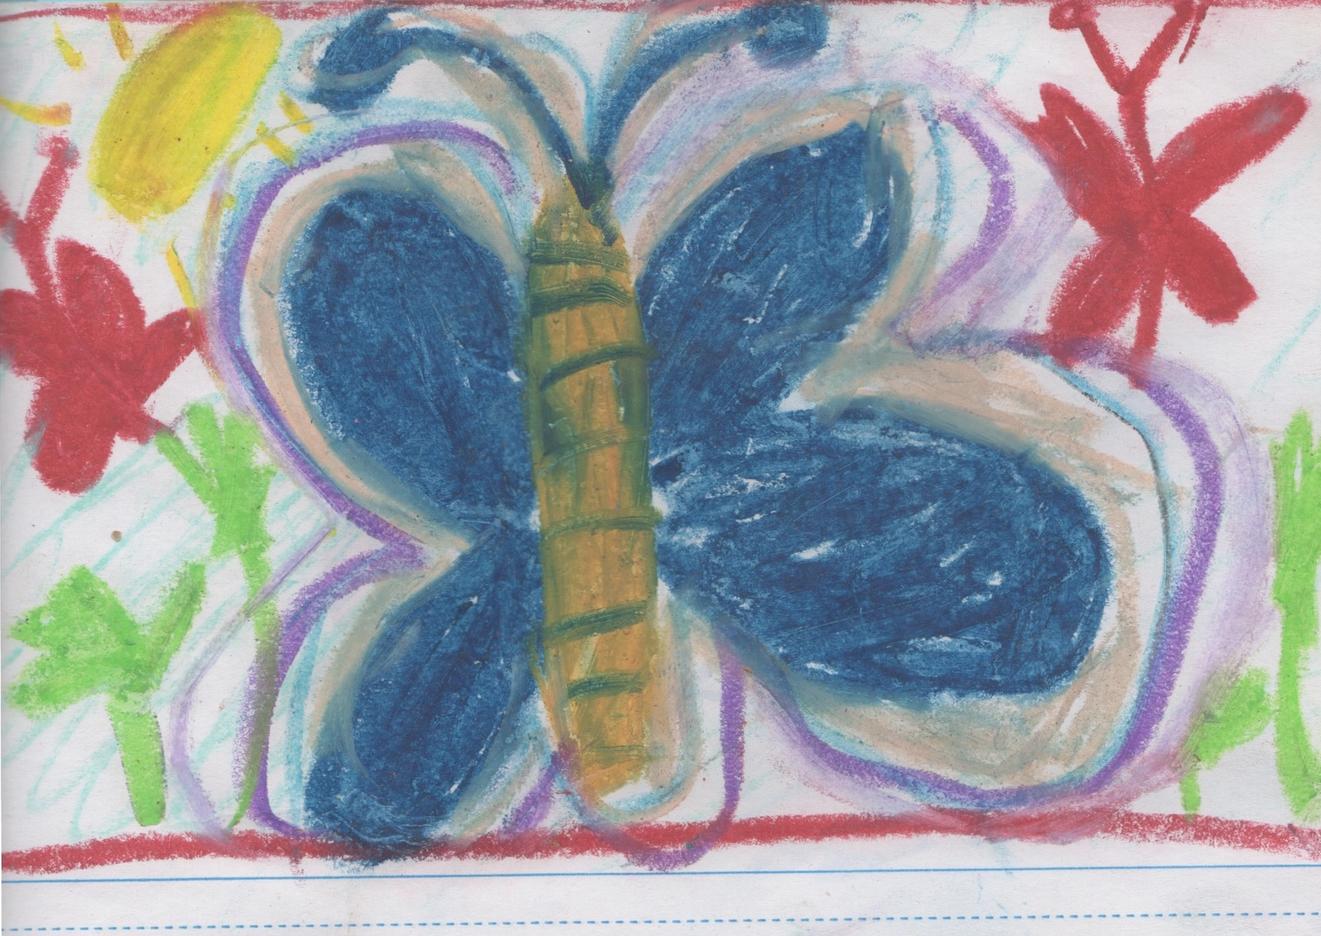 pastel drawing of a butterfly with blue wings and yellow abdomen with blue stripes. butterfly has beige and purple outlines. small red butterflies are on both sides of the blue butterfly. 